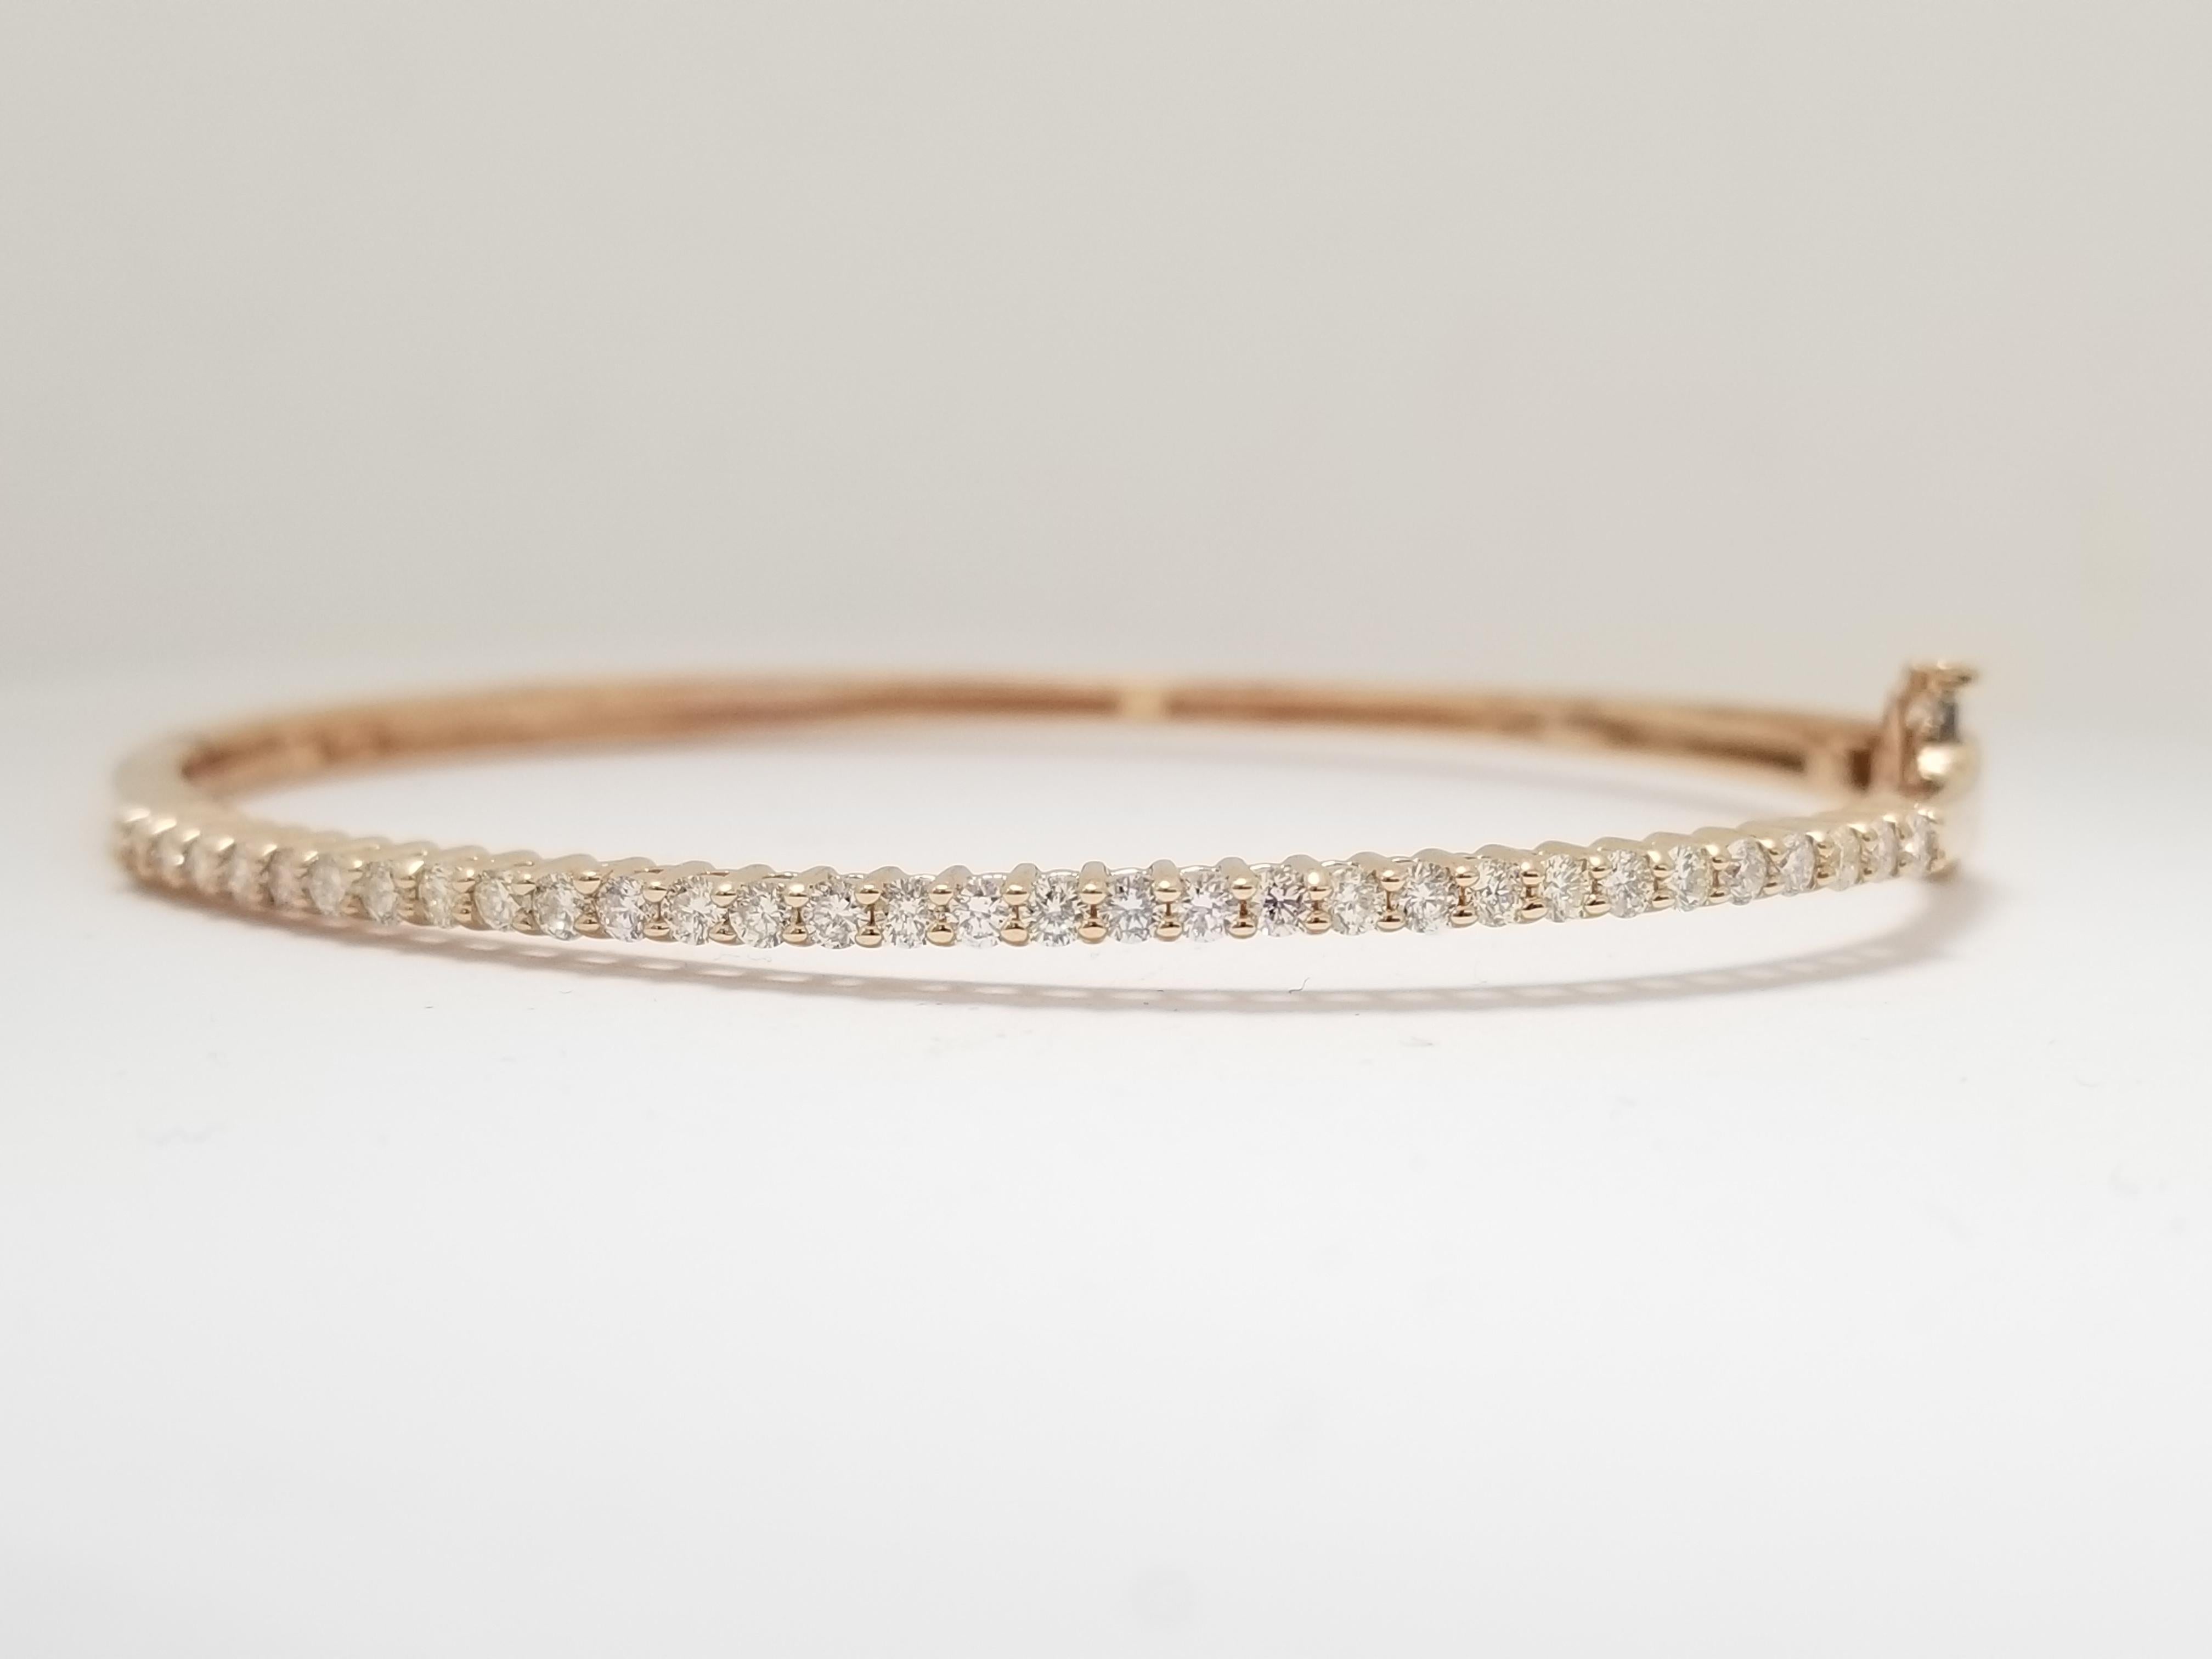 31 pcs natural diamonds paved bangle rose gold 14k, inner diameter 2.50 inch by 2.25 inch. 

Average Color/Clarity: H-VS
Measurements: 2.2mm
